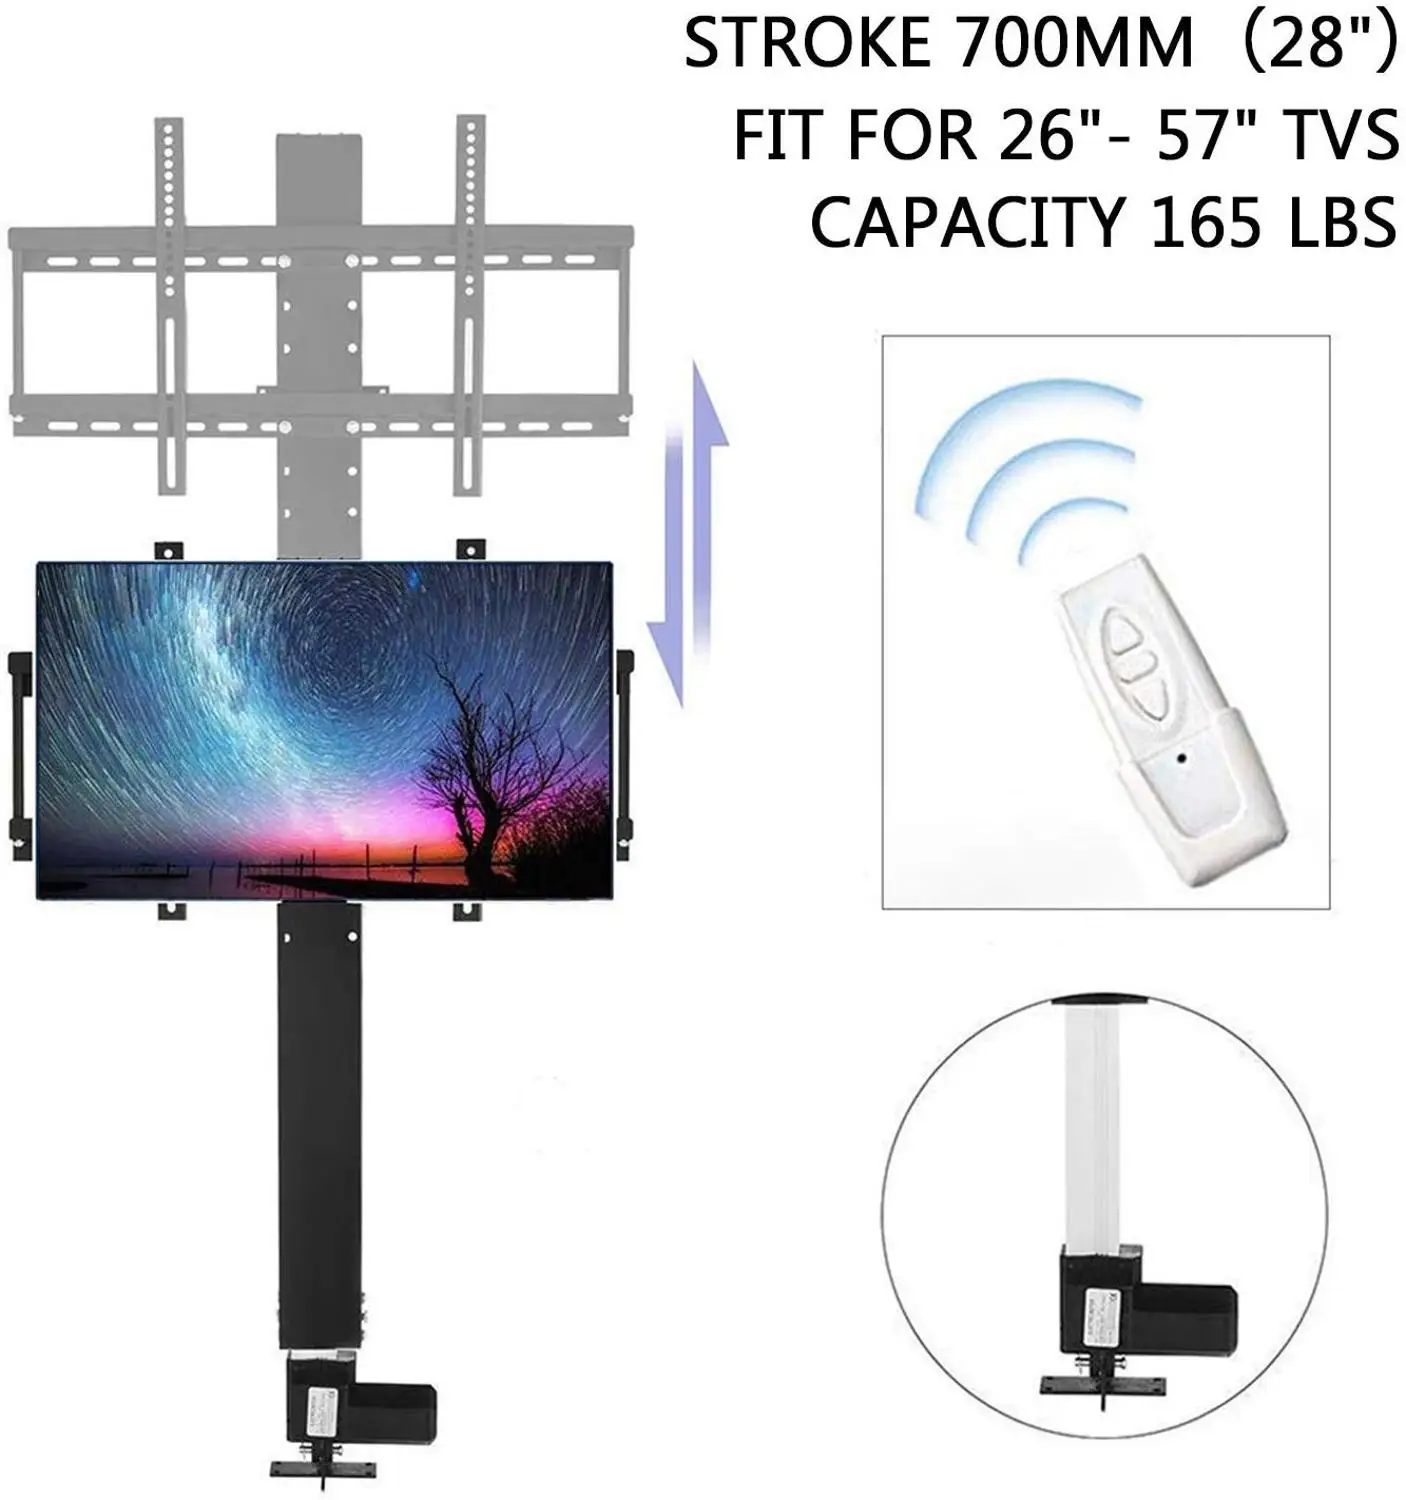 700mm Motorized TV Lift Stand Mount Bracket for 26"-57" TVs W/ Remote Controller 